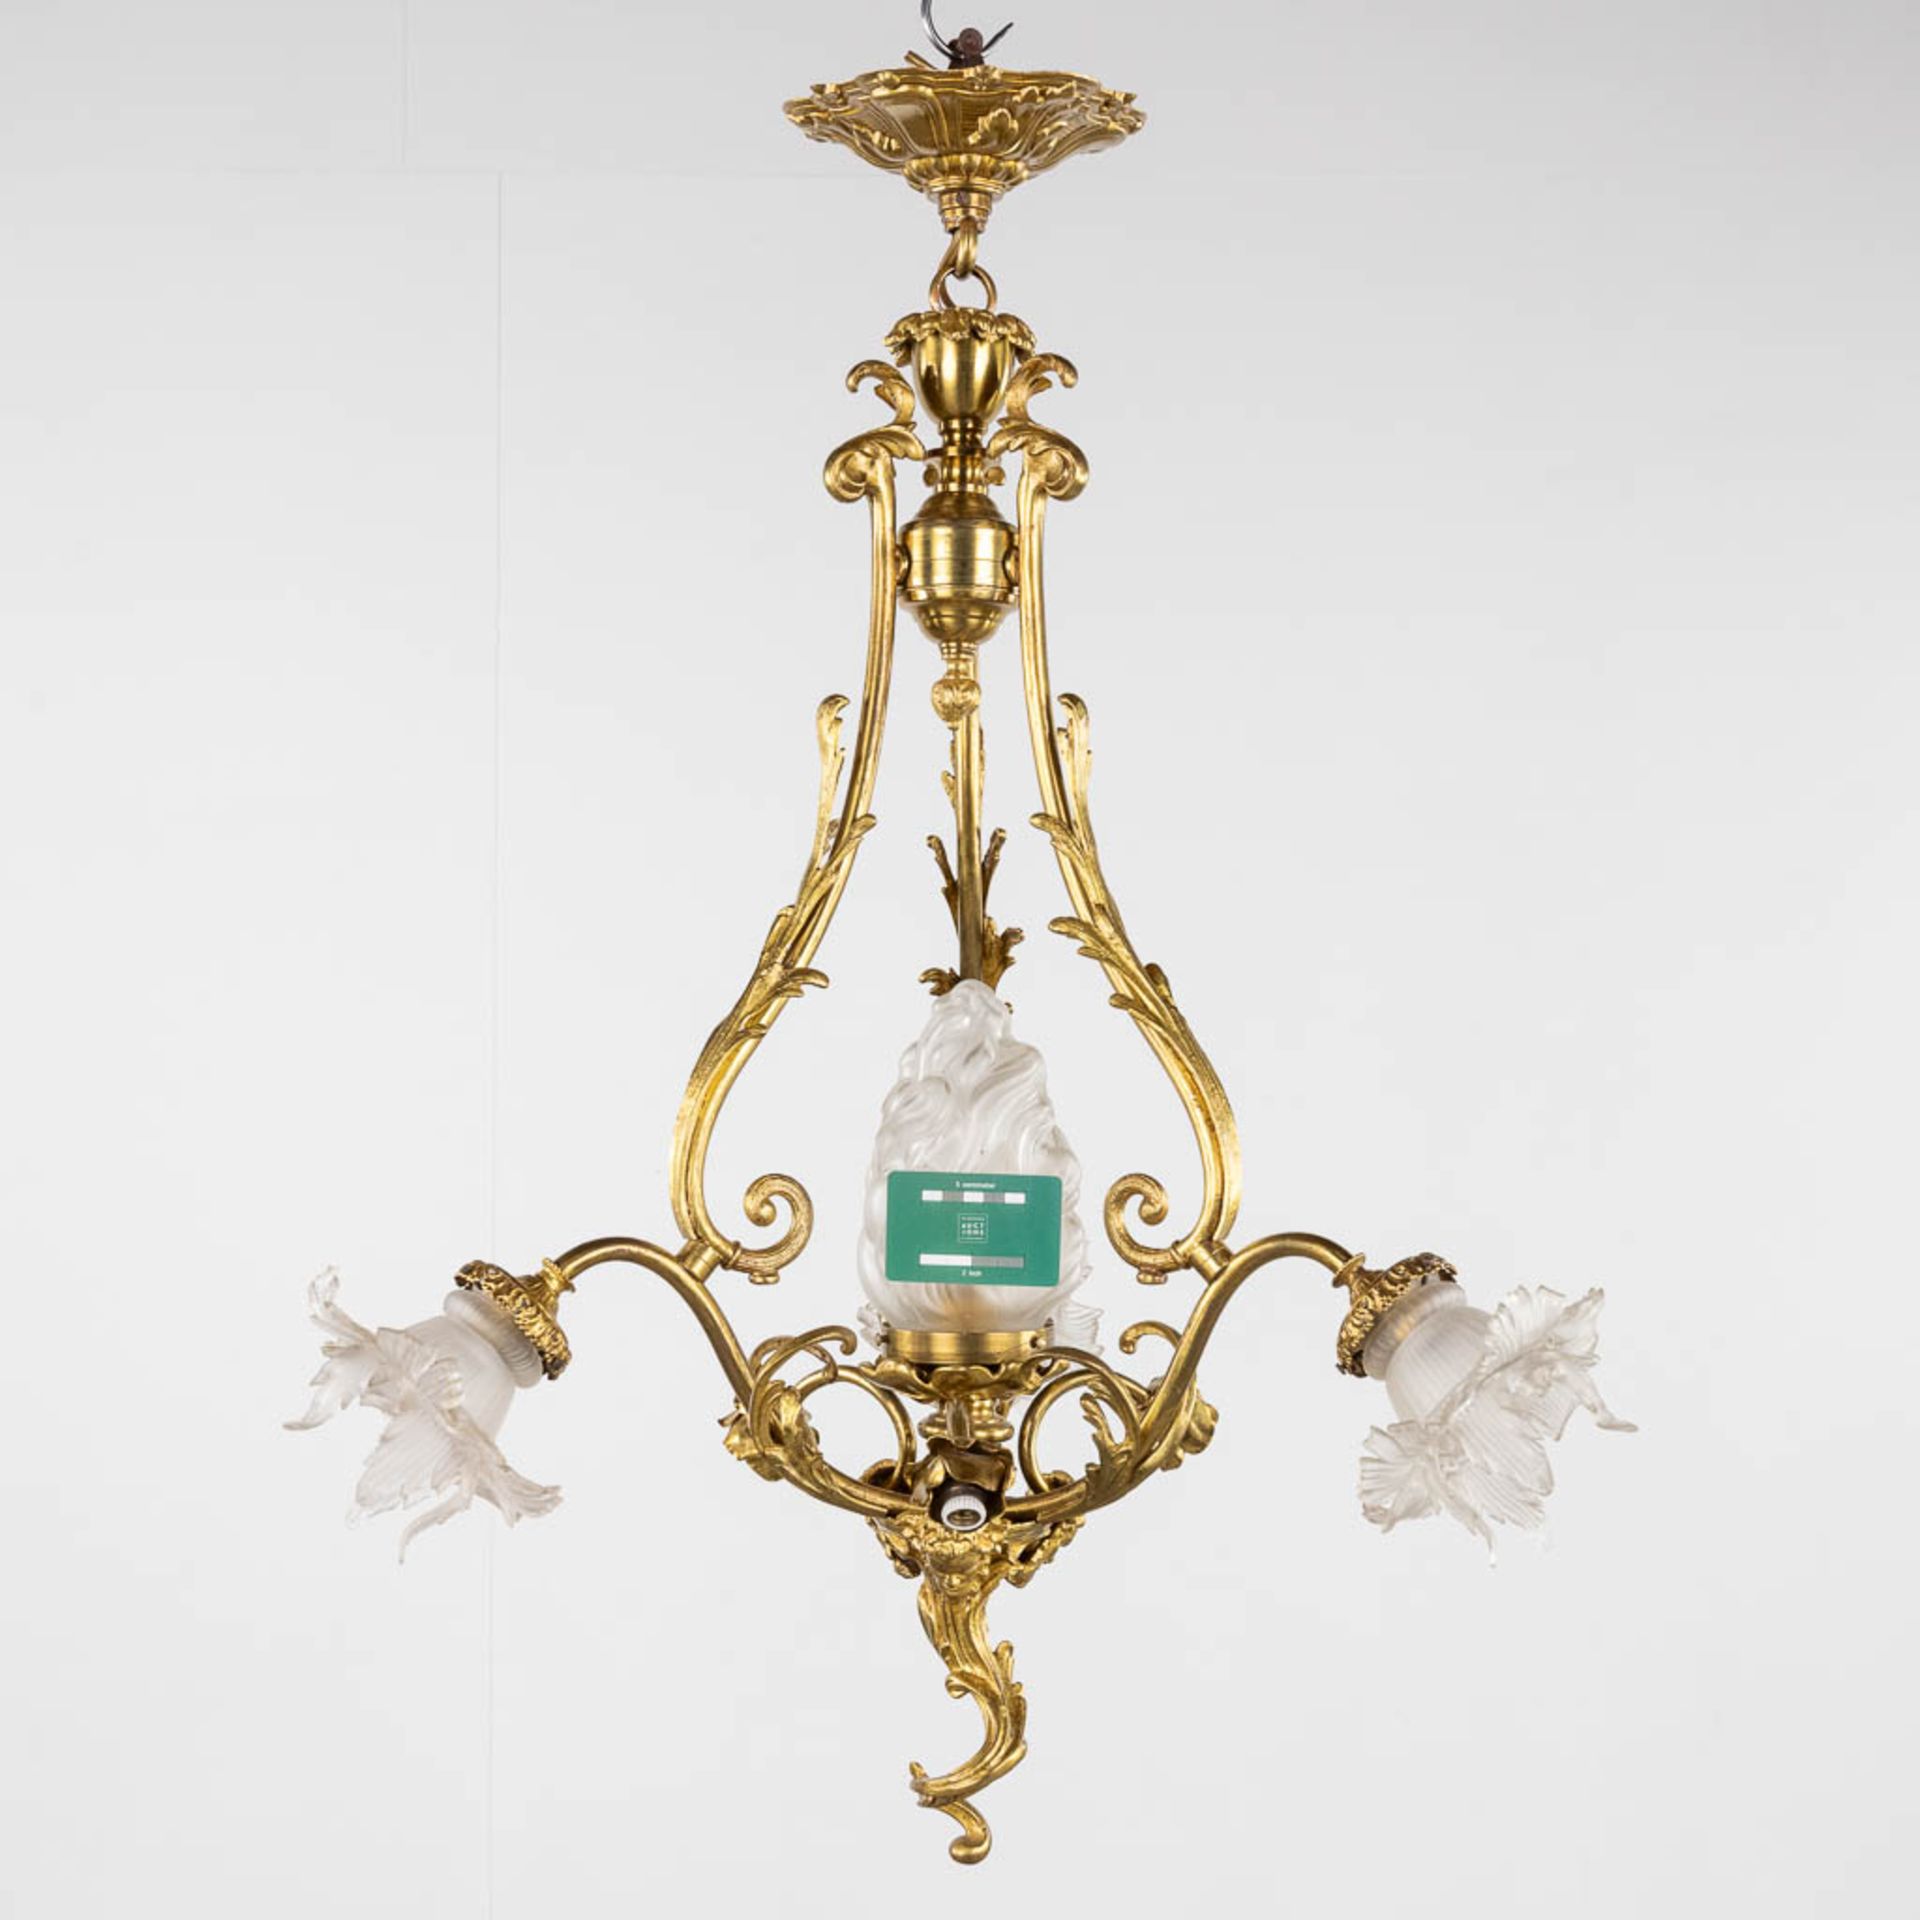 A chandelier, bronze with glass shades and a flambeau, decorated with Satyr figurines. (H:88 x D:54 - Image 2 of 13